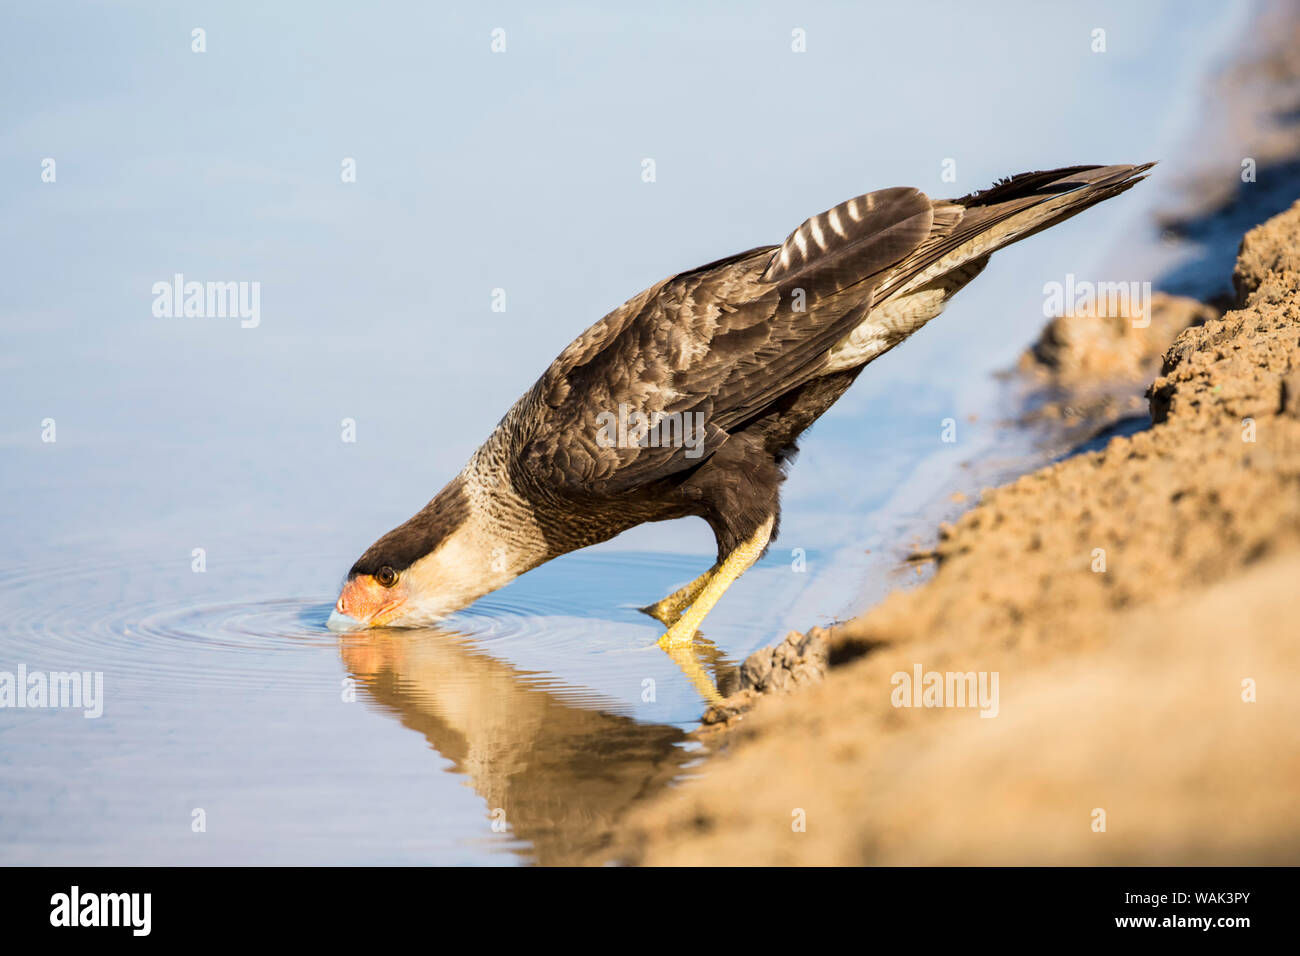 Pantanal, Mato Grosso, Brazil. Male southern crested caracara drinking from a river. Stock Photo